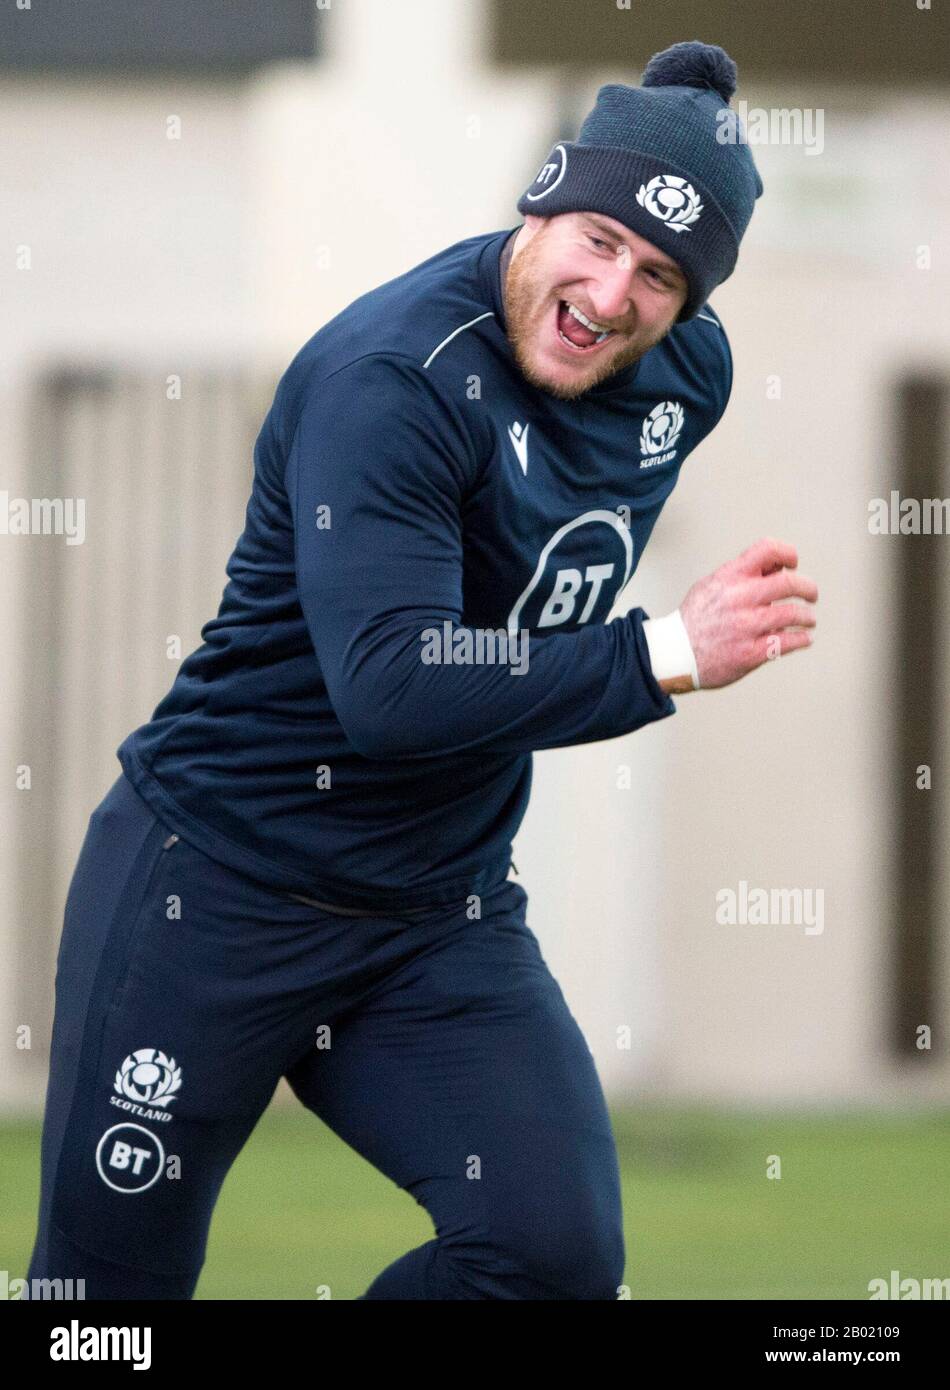 Oriam Sports Centre, Heriot-Watt University's Riccarton campus, Edinburgh: 18th February, 2020. Scotland rugby team training session prior to their Guinness Six Nations match against Italy in Rome. Scotland captain Stuart Hogg.  Credit: Ian Rutherford/Alamy Live News Stock Photo